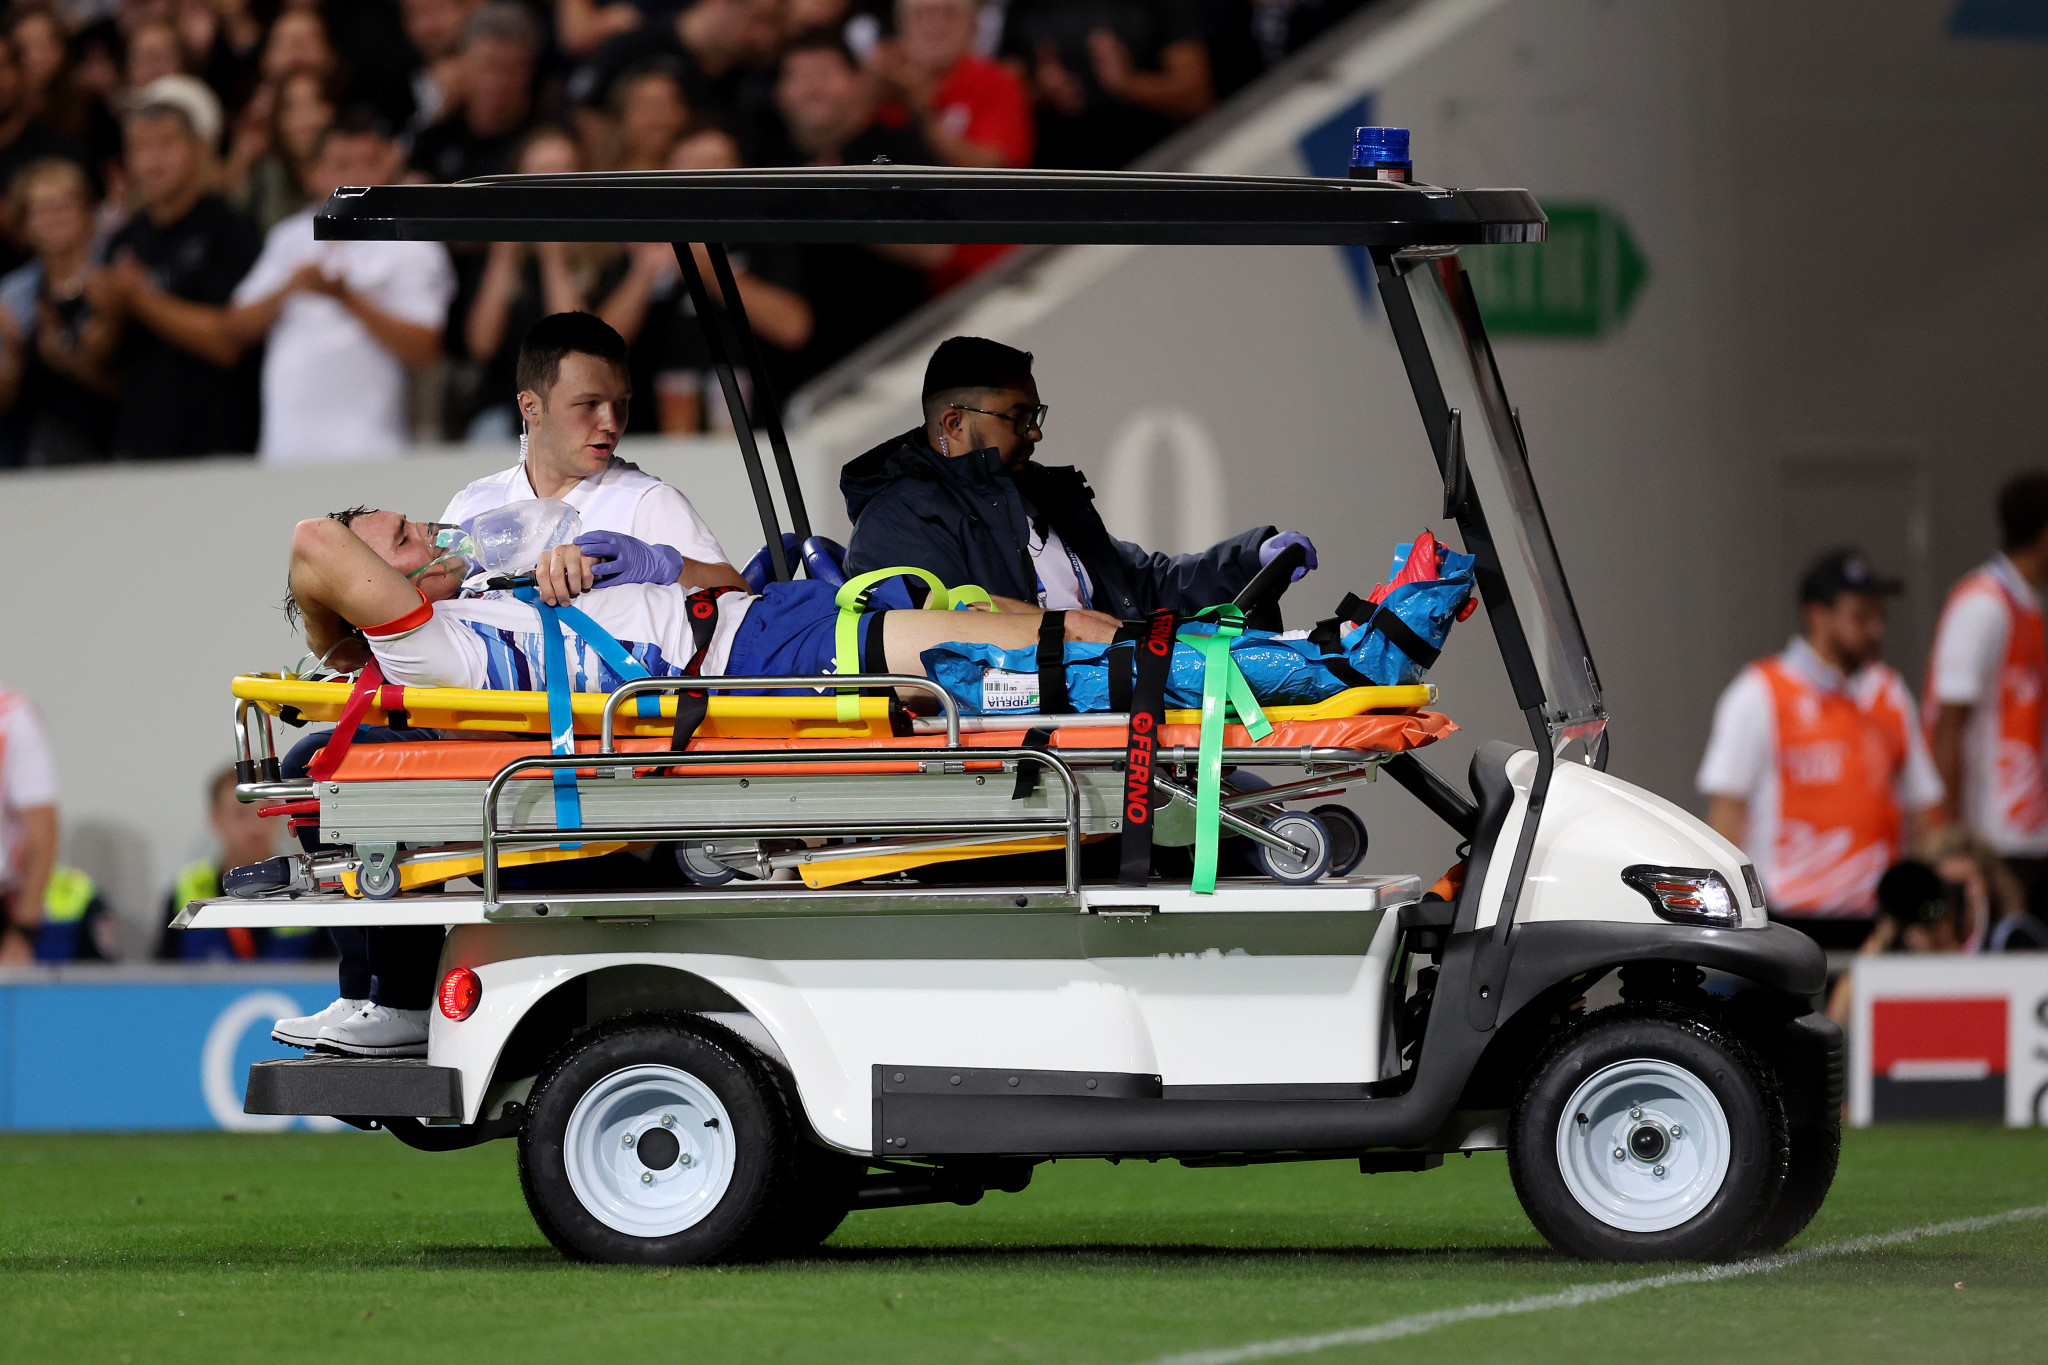 Le Roux Malan was taken off the pitch following a serious ankle injury ©Getty Images